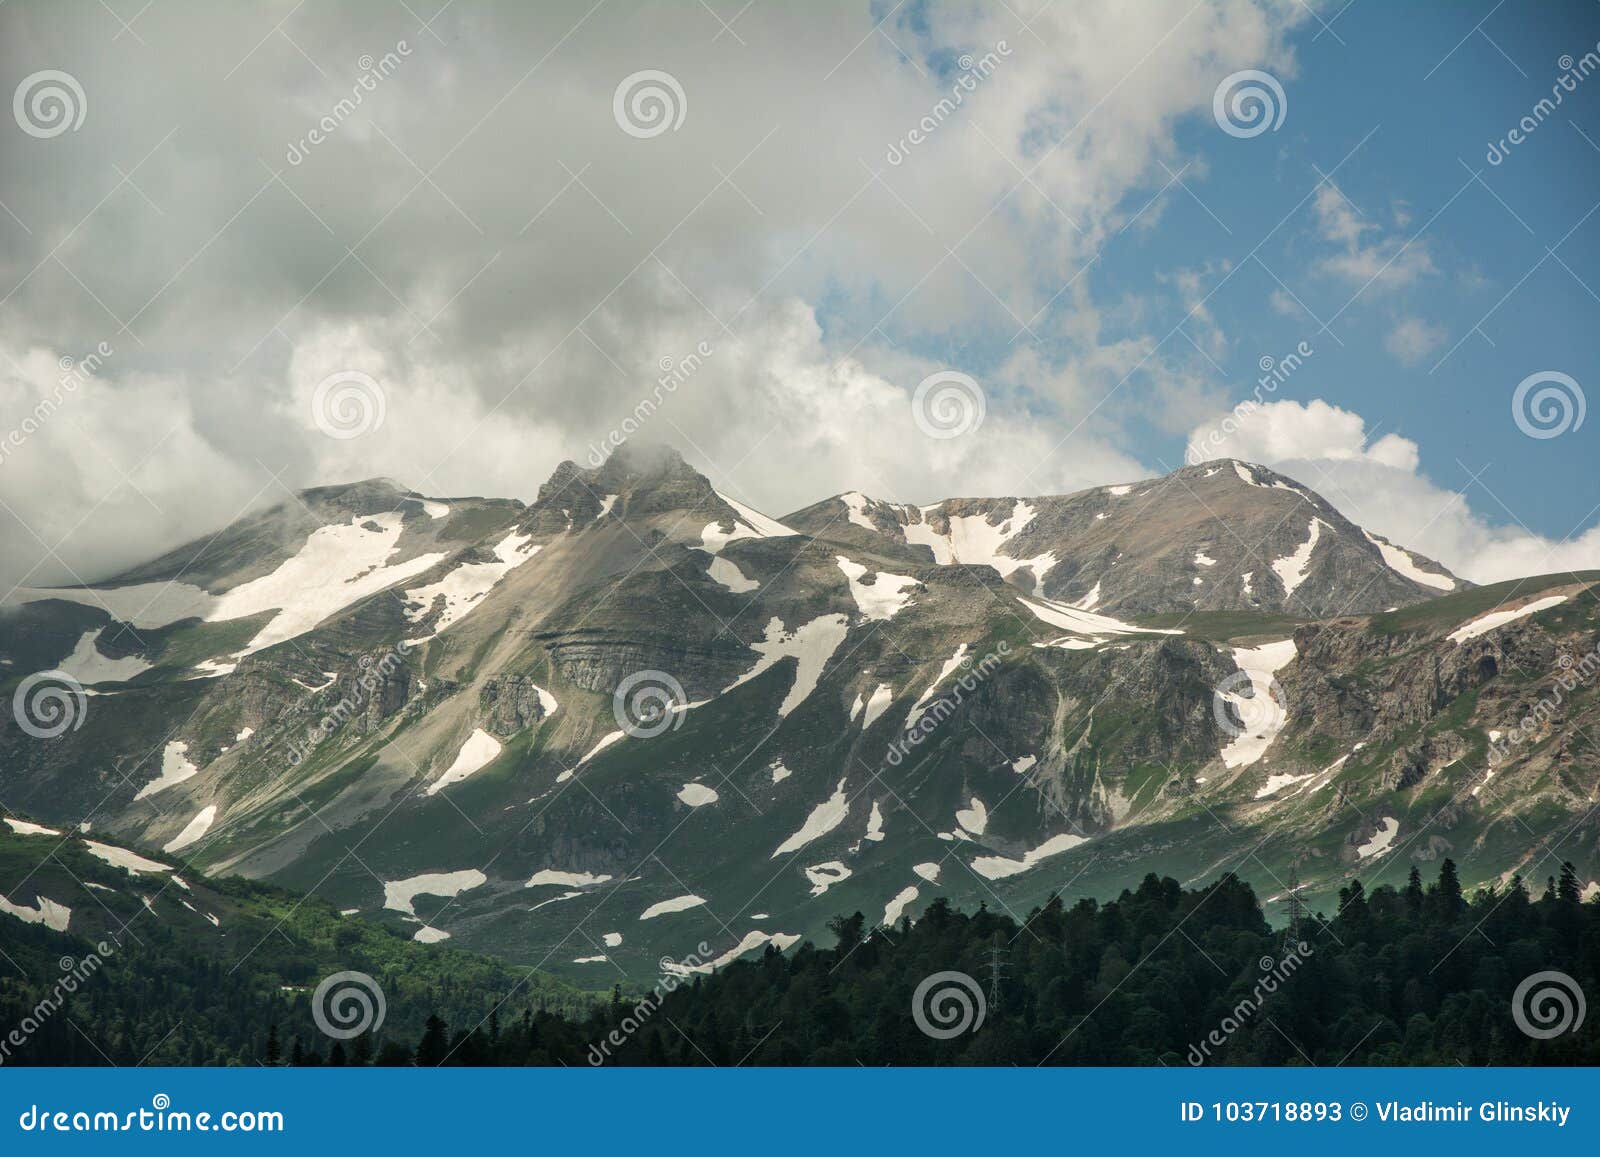 The Caucasus are a Mountain System in Asia between the Black Sea and Caspian Sea in the Caucasus Region. Stock Image - Image of famous: 103718893